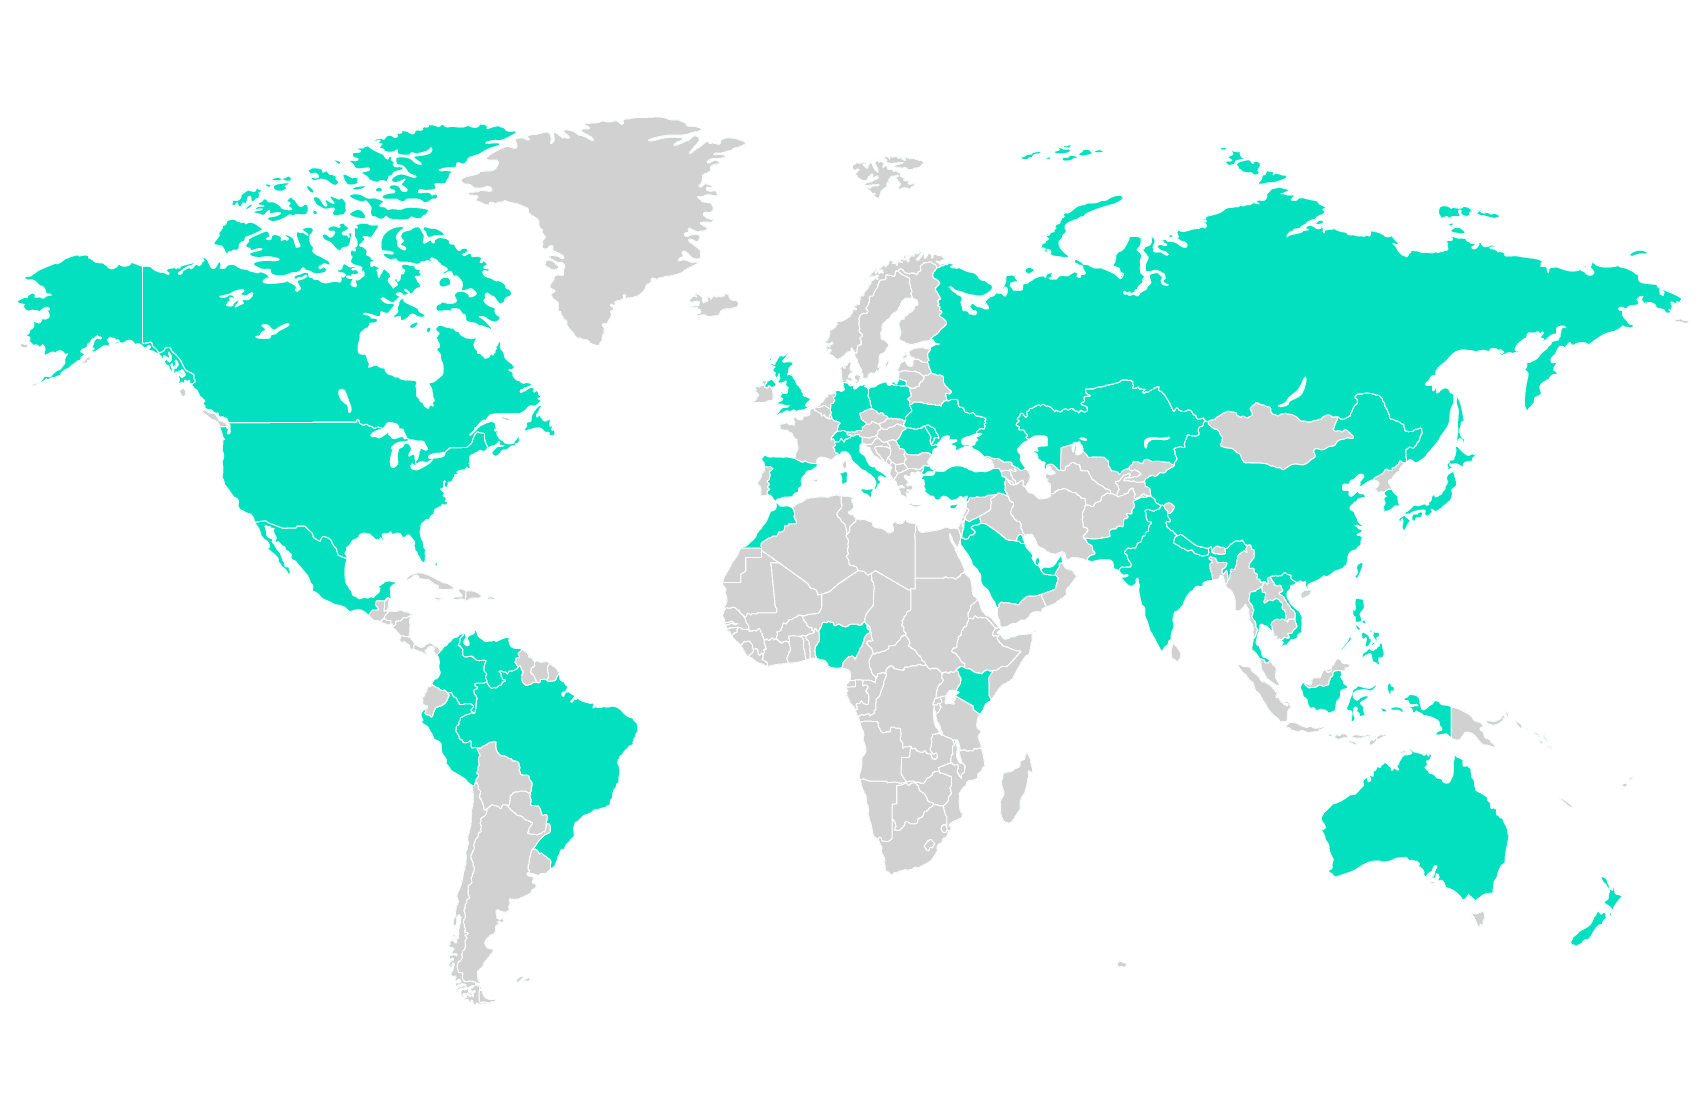 World map of countries from where Polygence has students